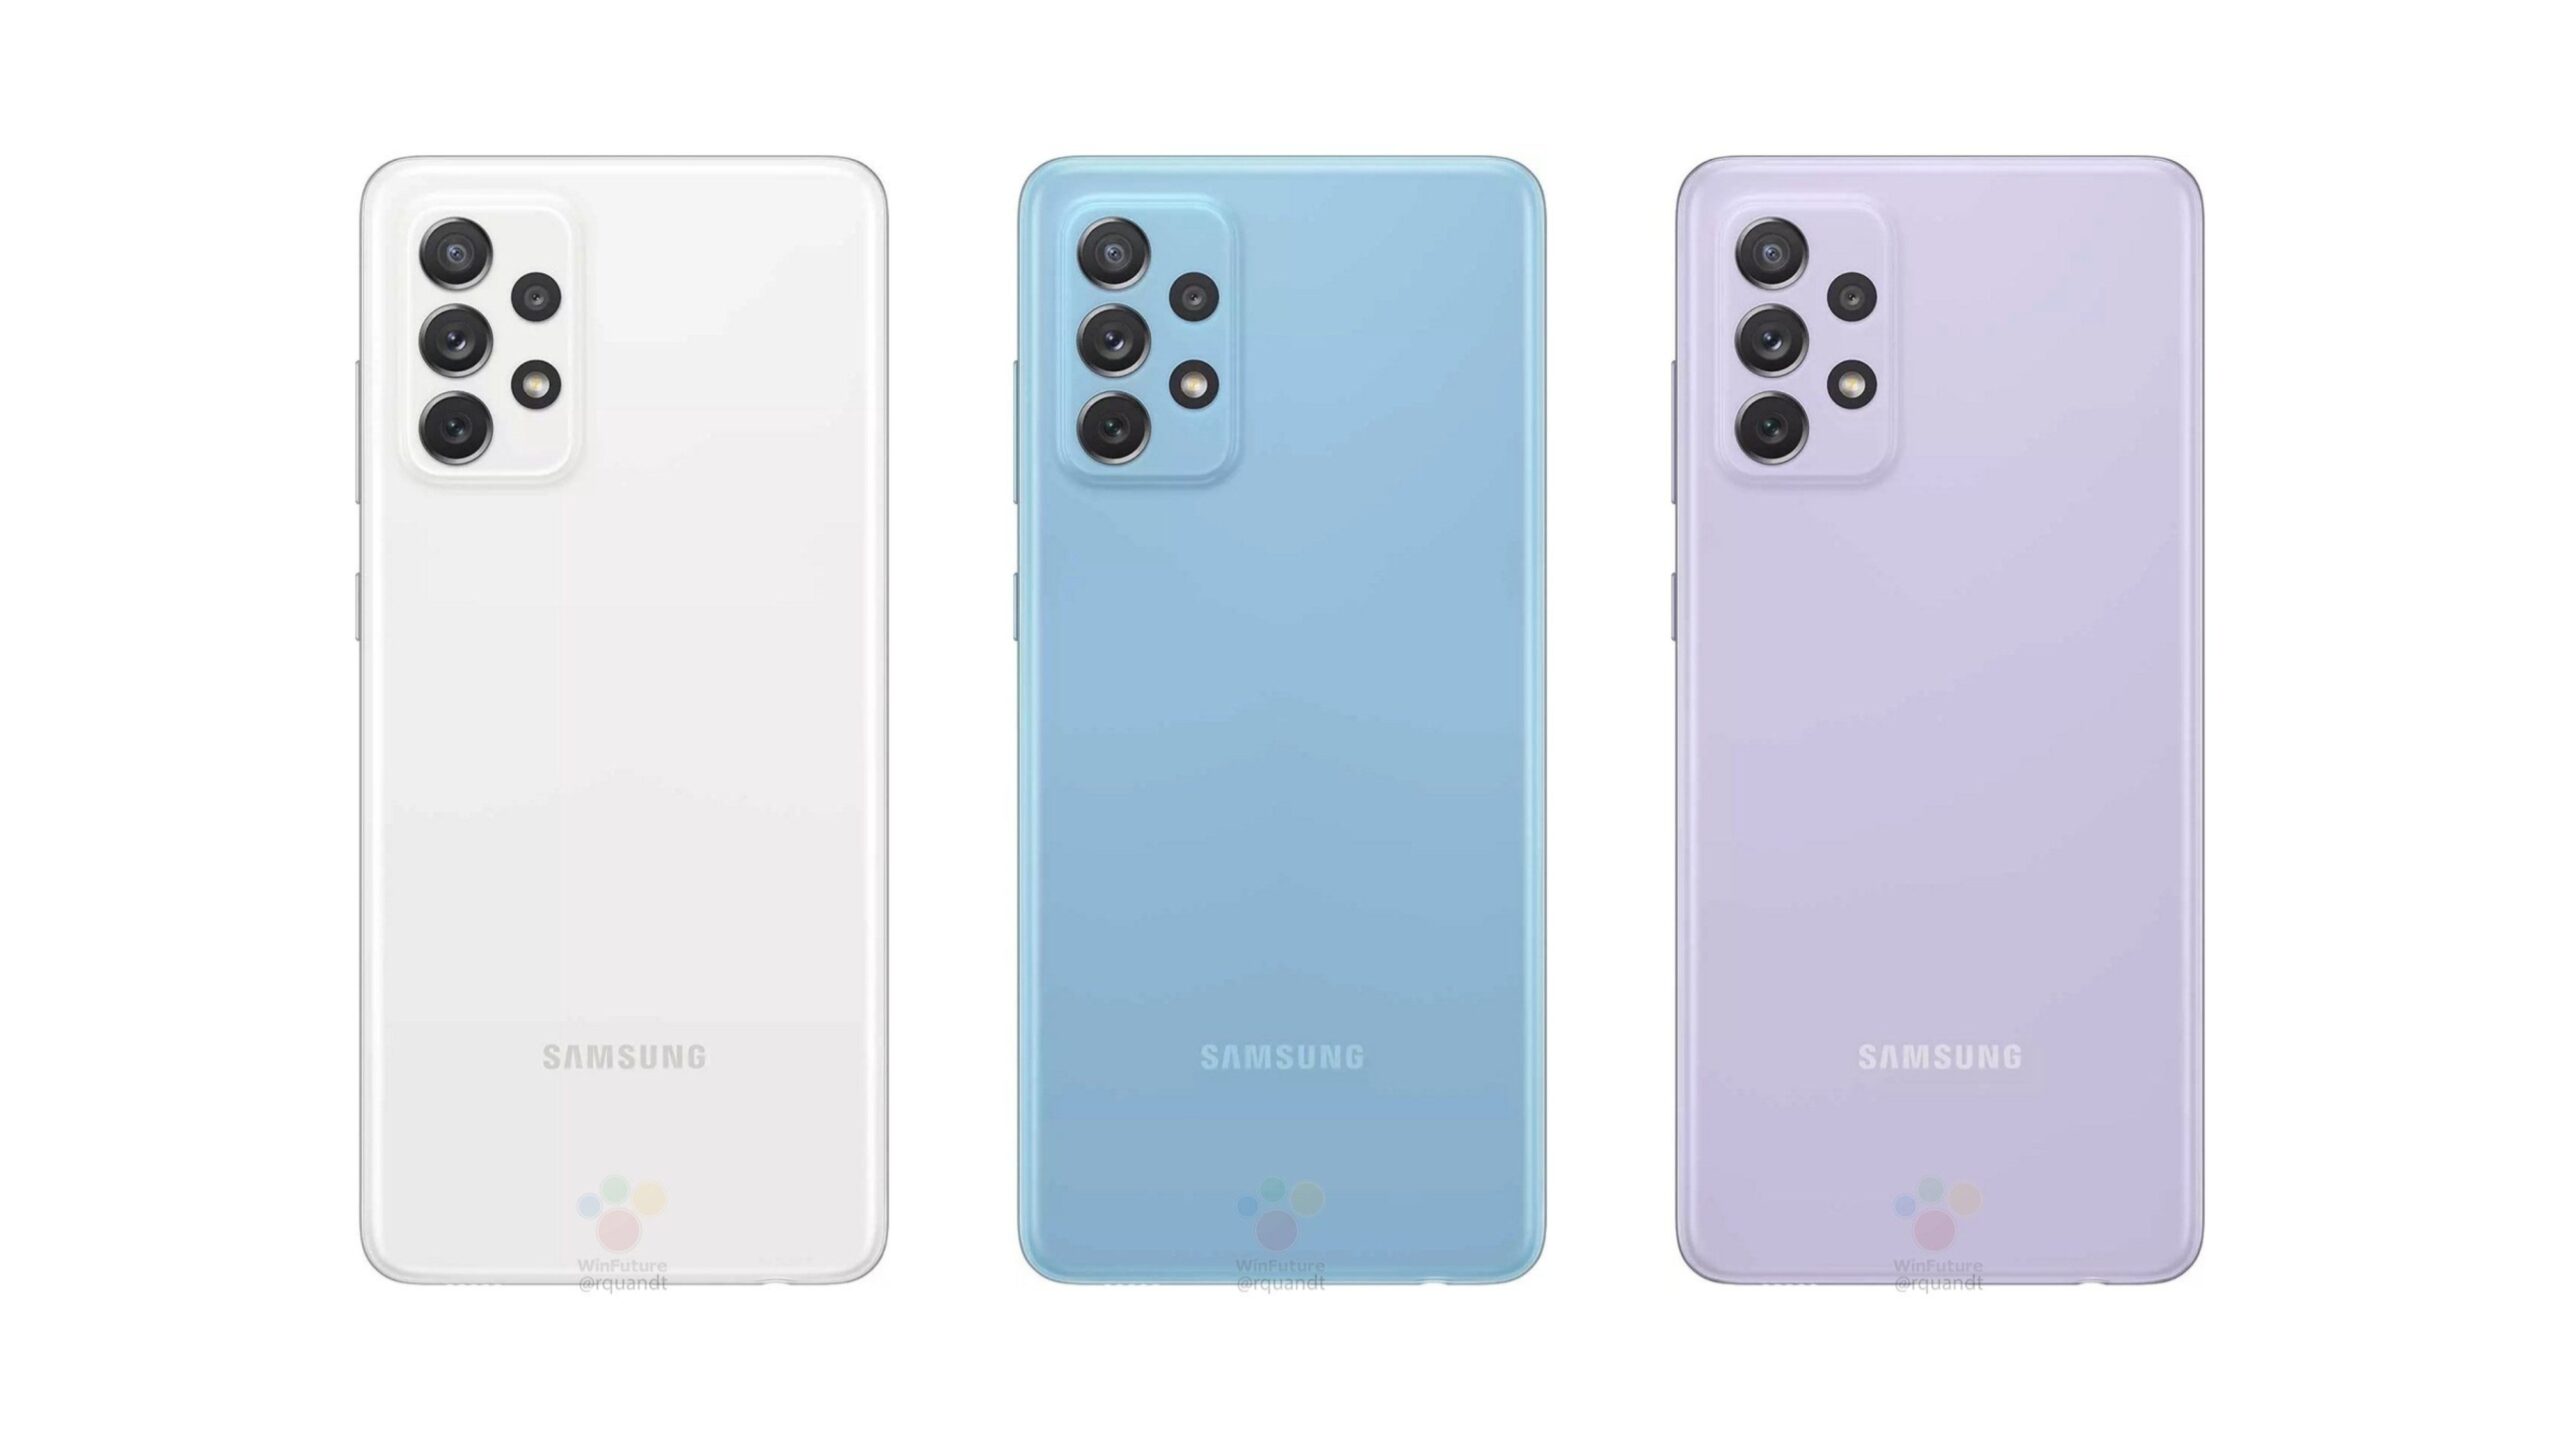 Entire specs of Galaxy A72 4G leak along with press renders